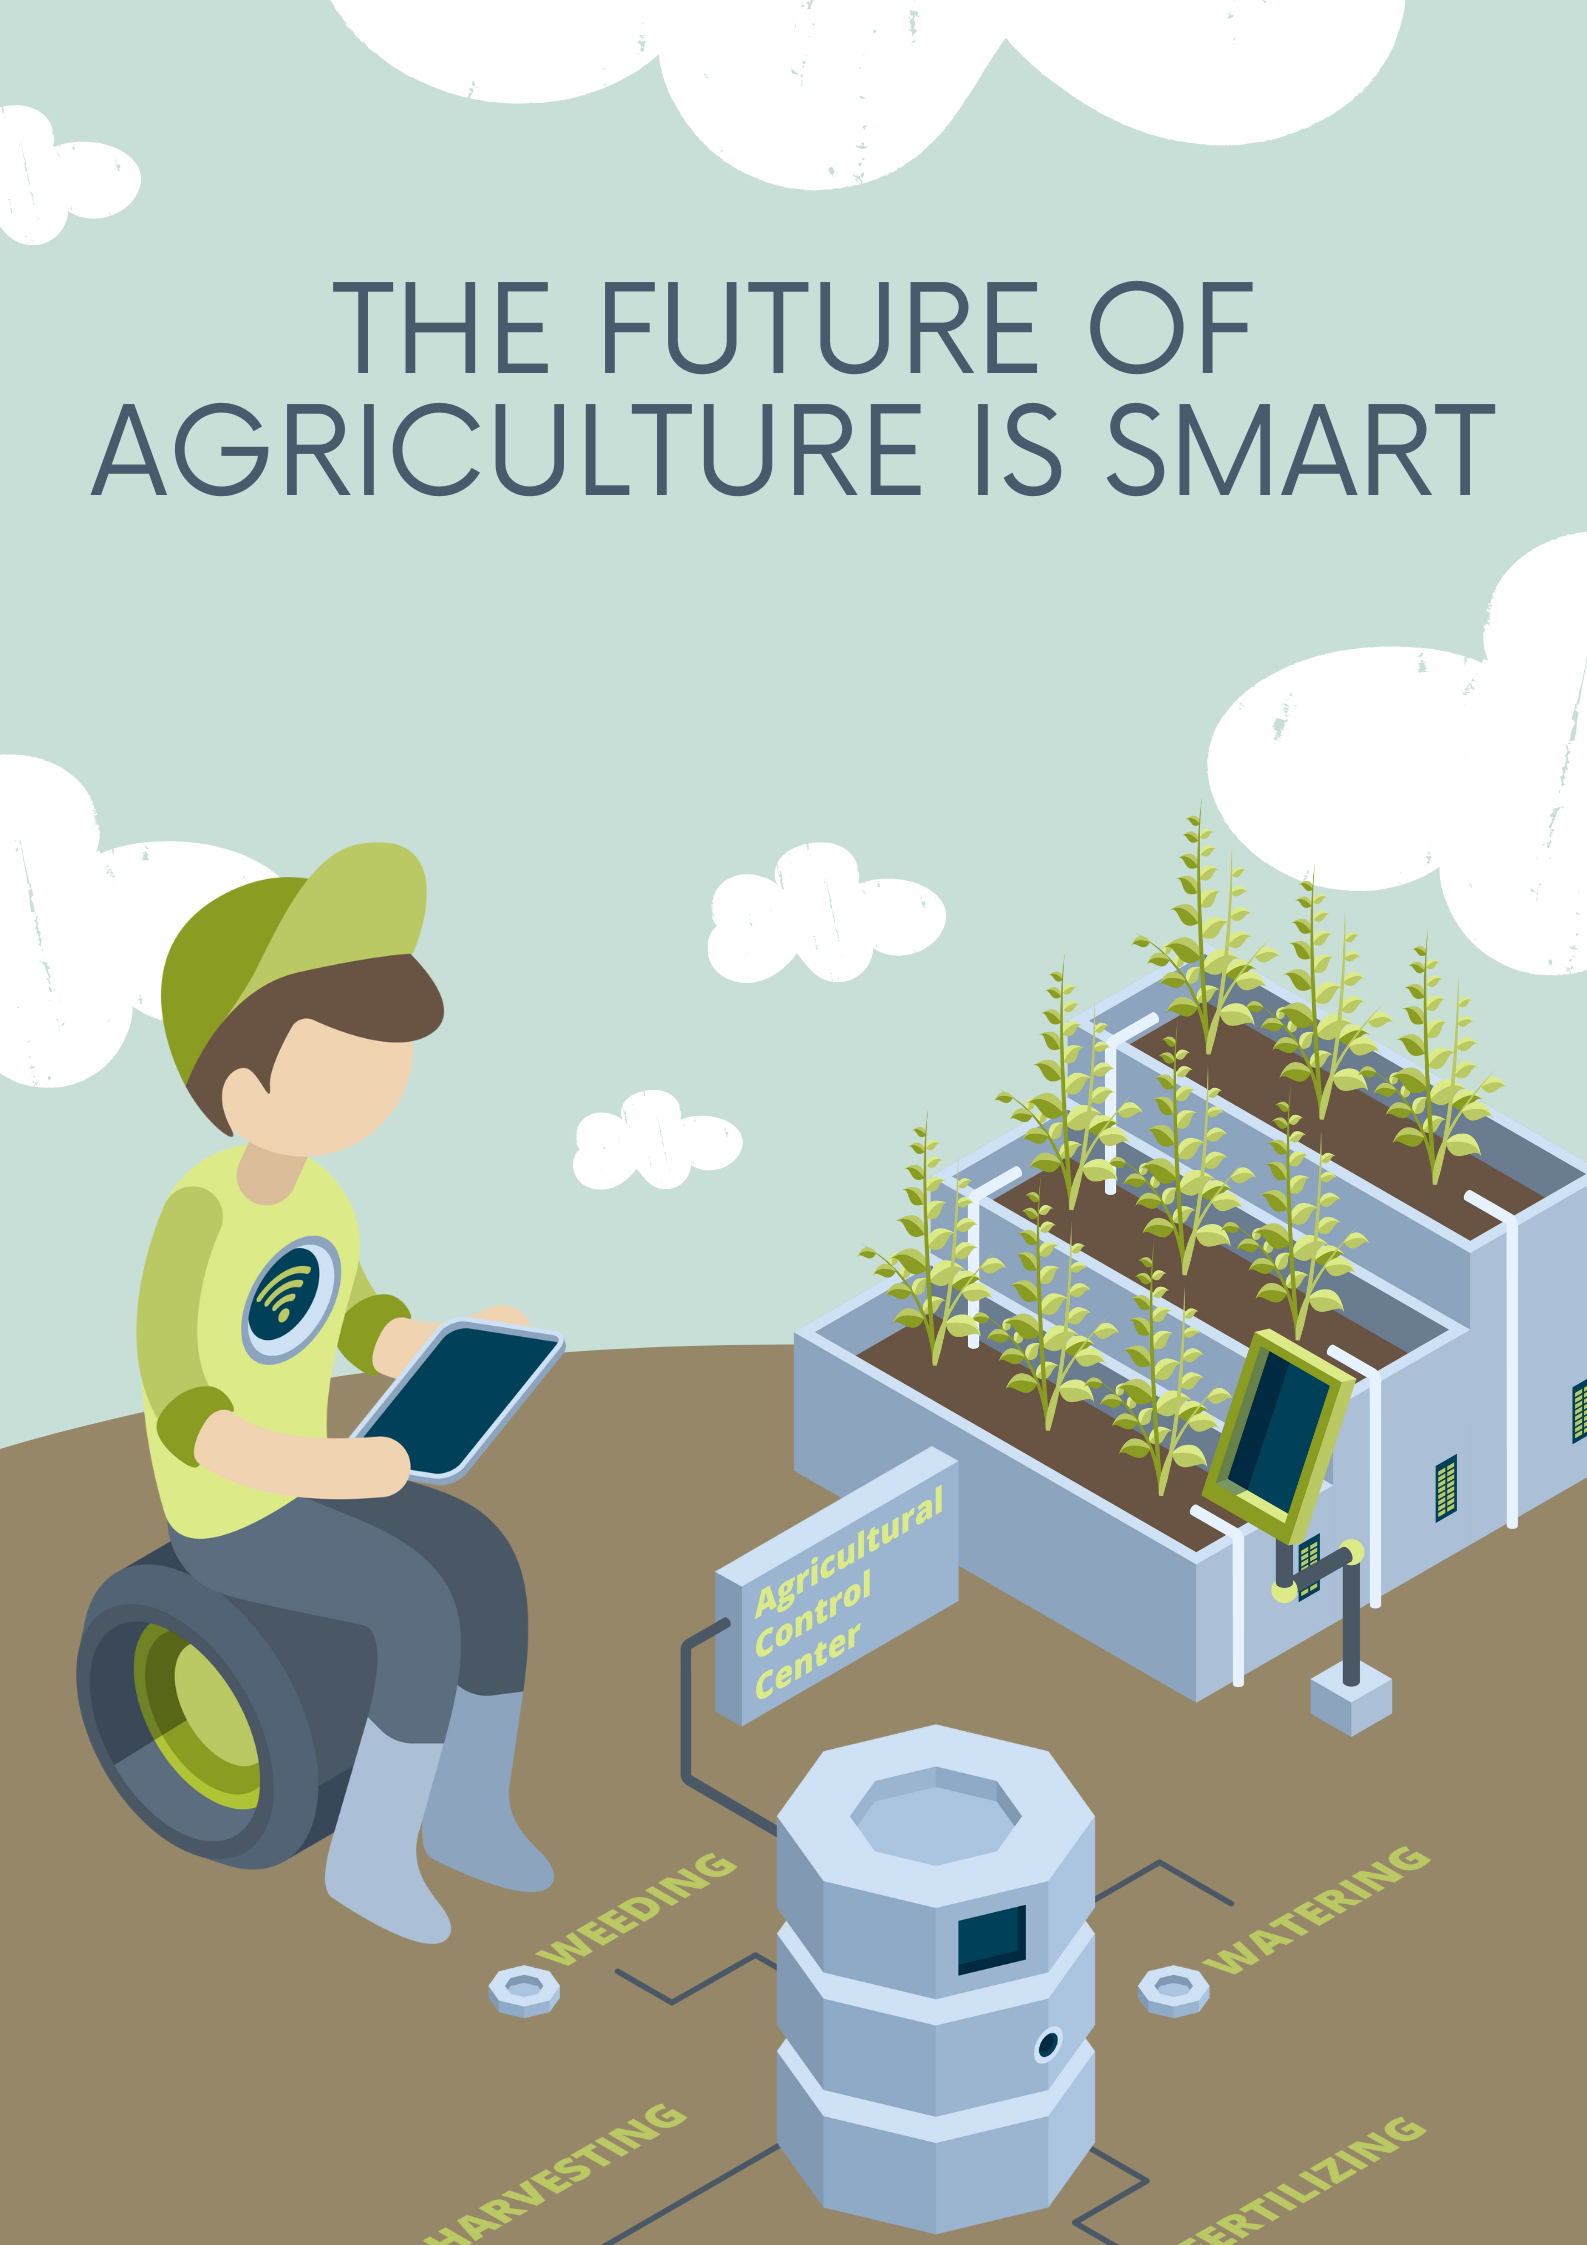 The Future of Agriculture is Smart